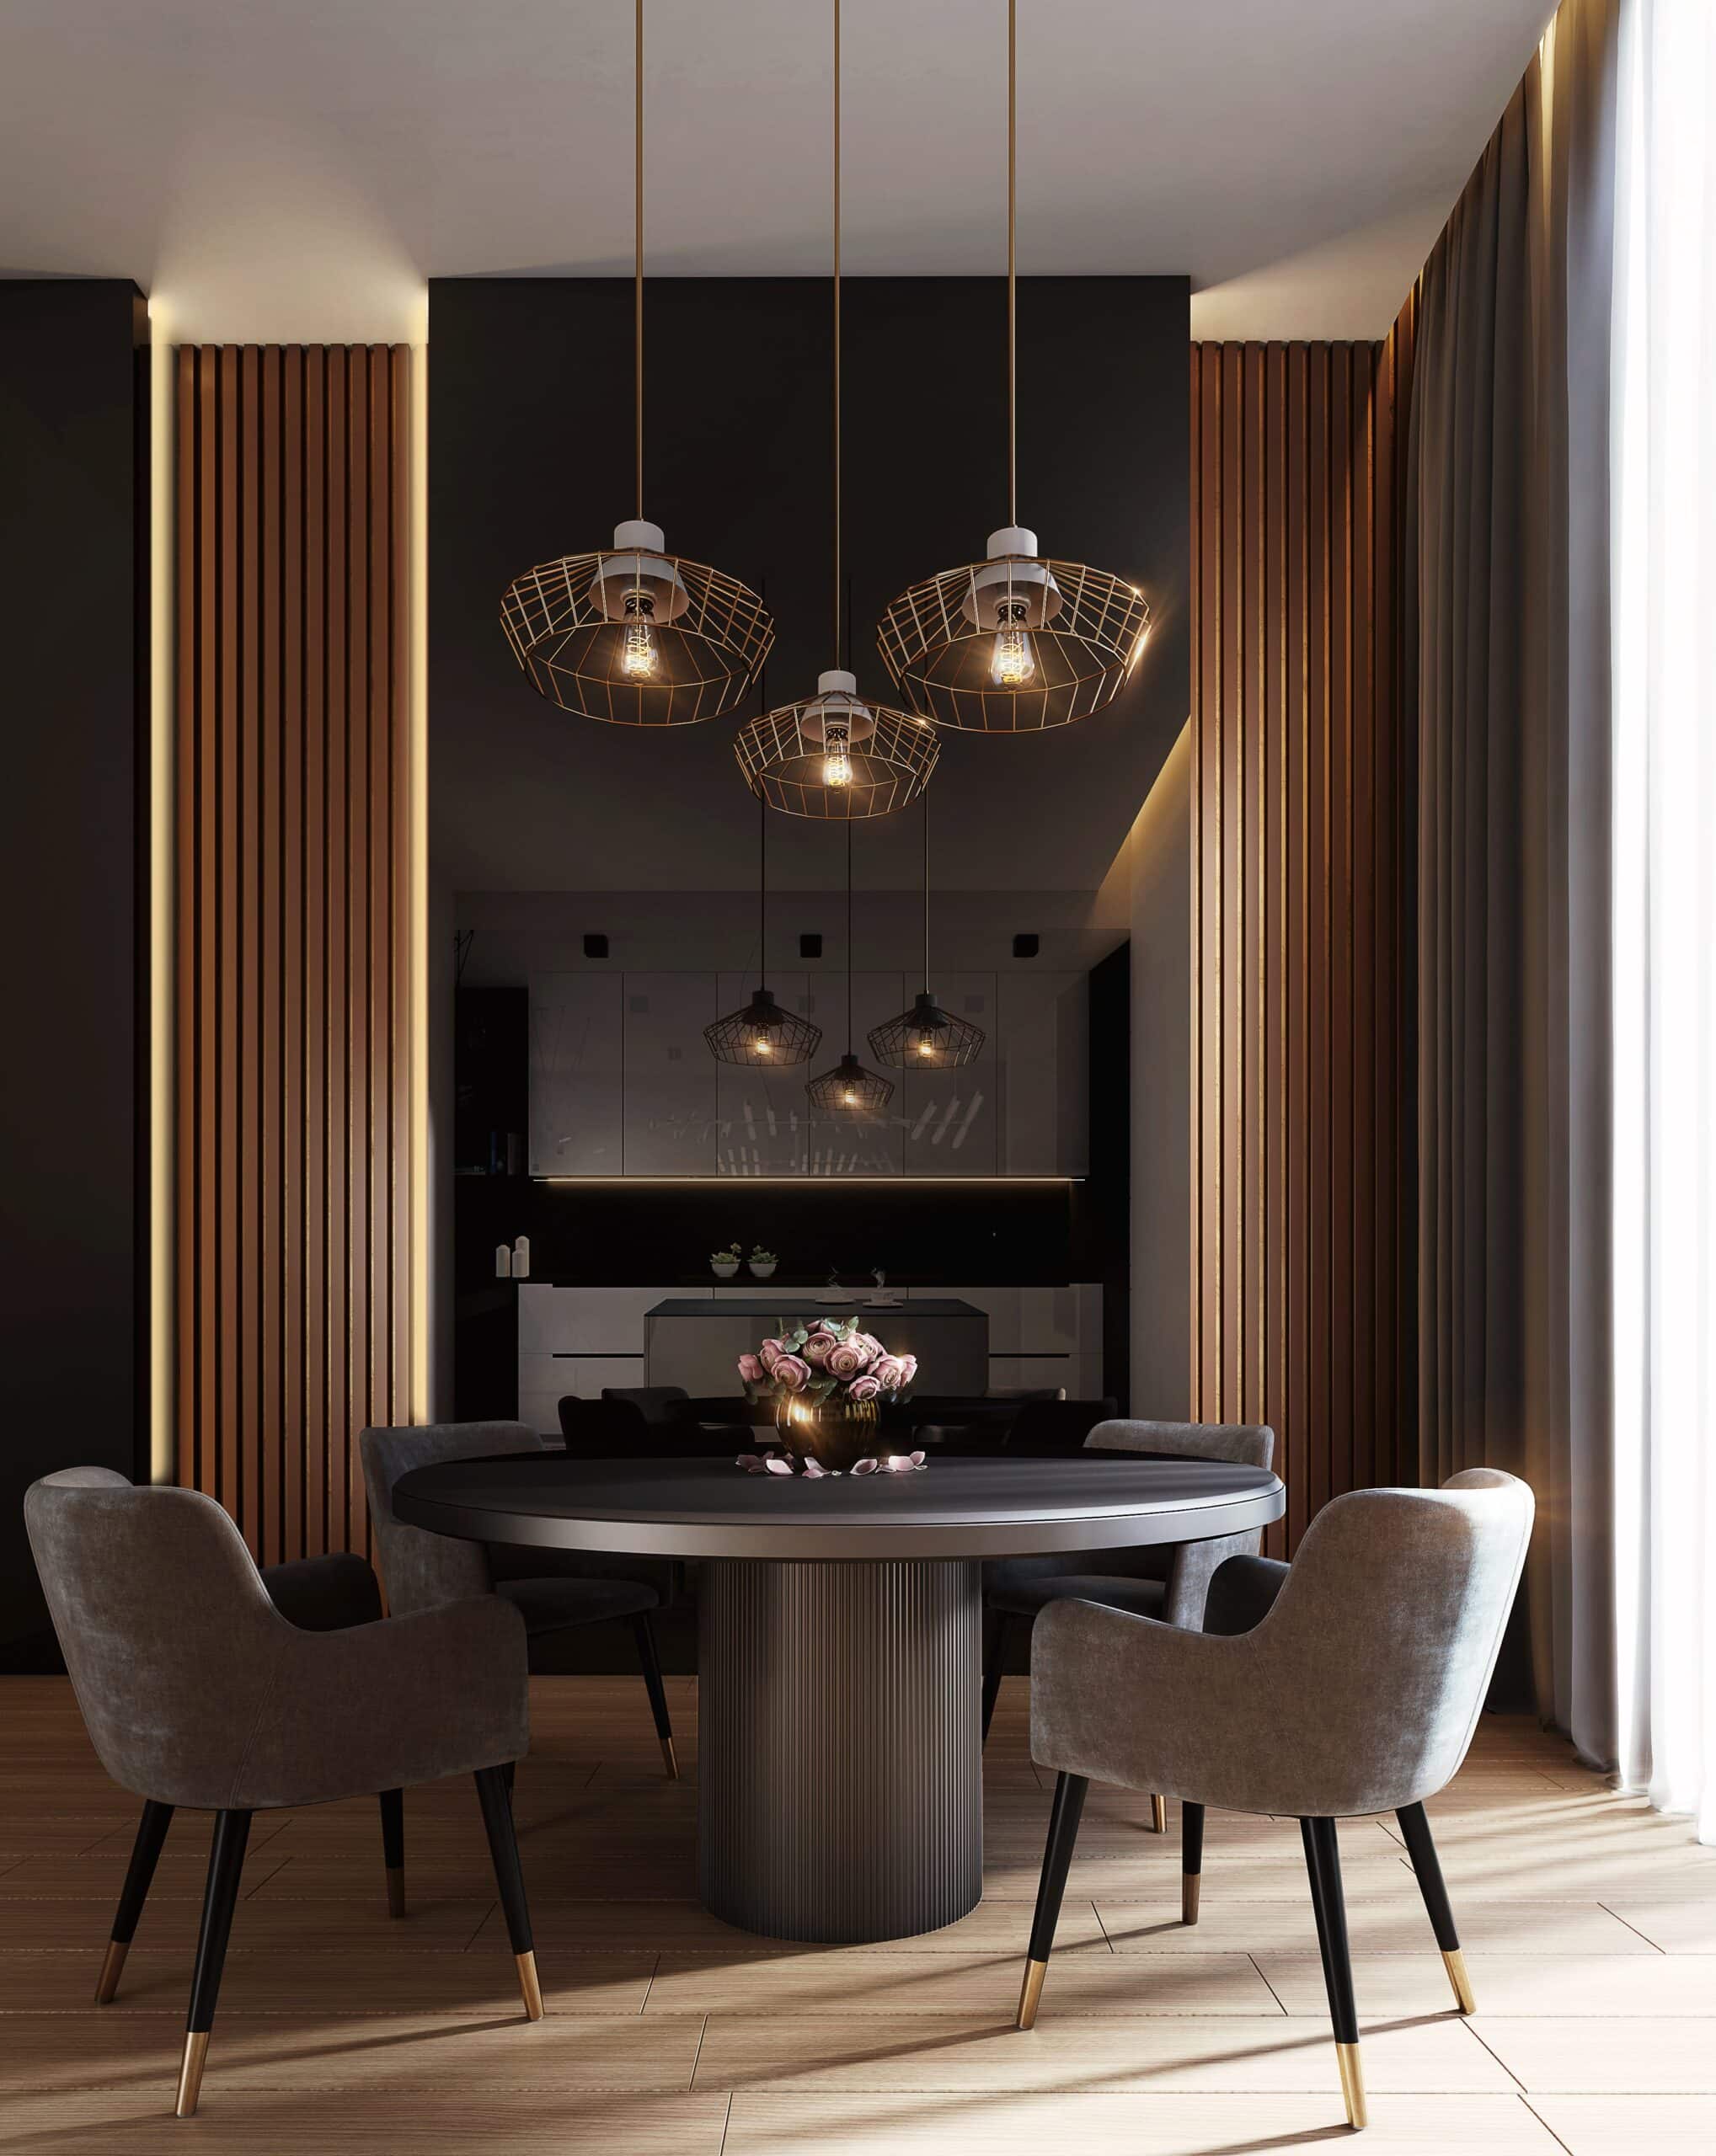 Picture of a dining room table with a three pendant chandelier